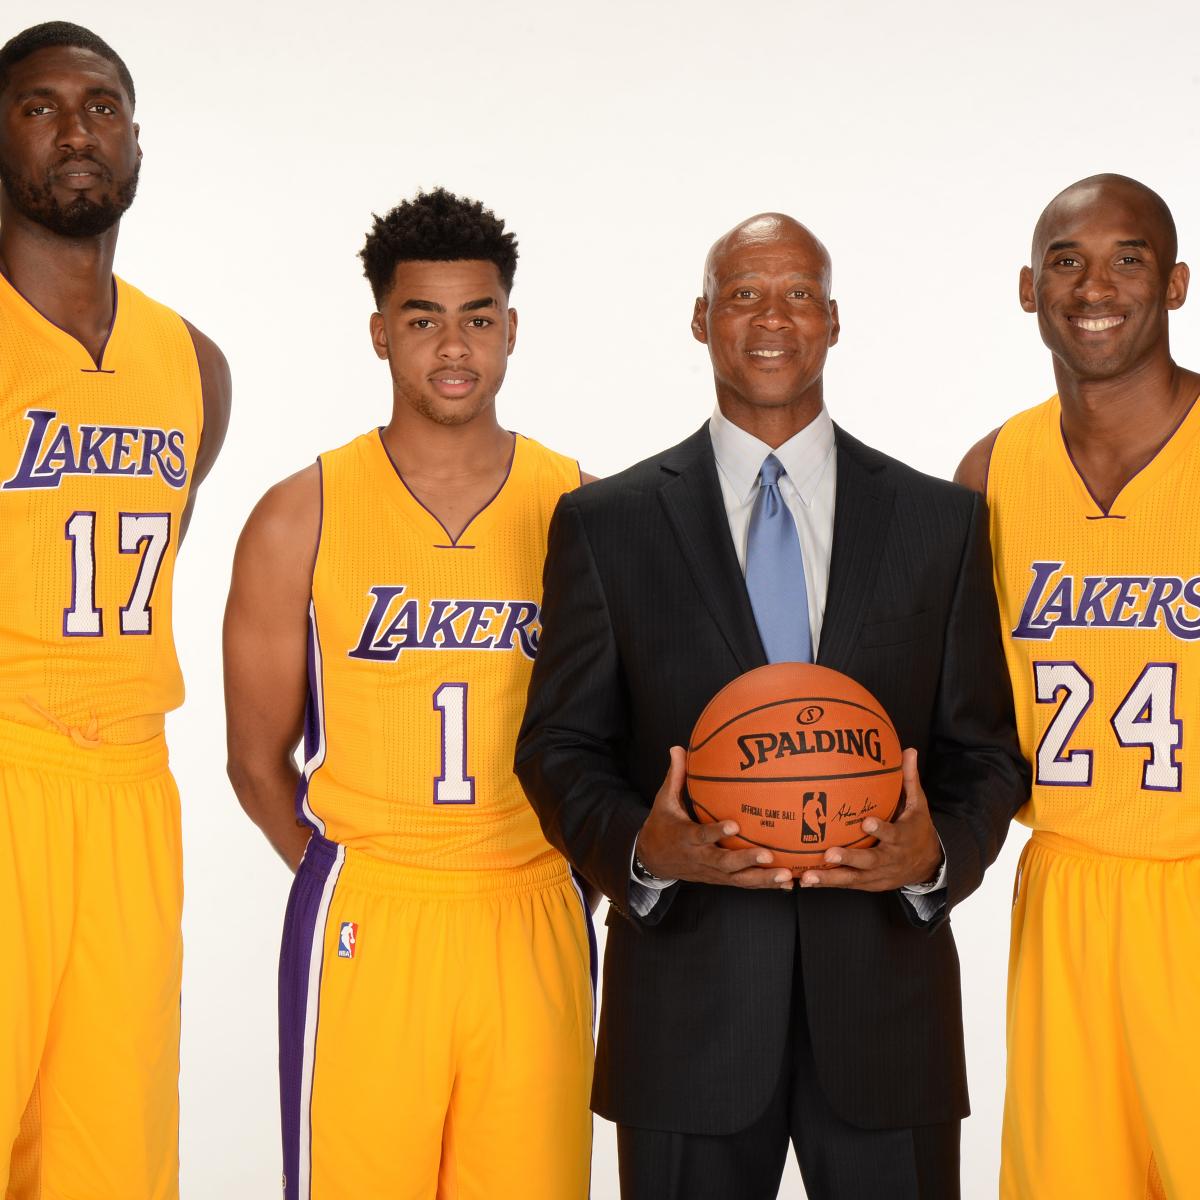 Los Angeles Lakers all-time roster: See which legends made the cut